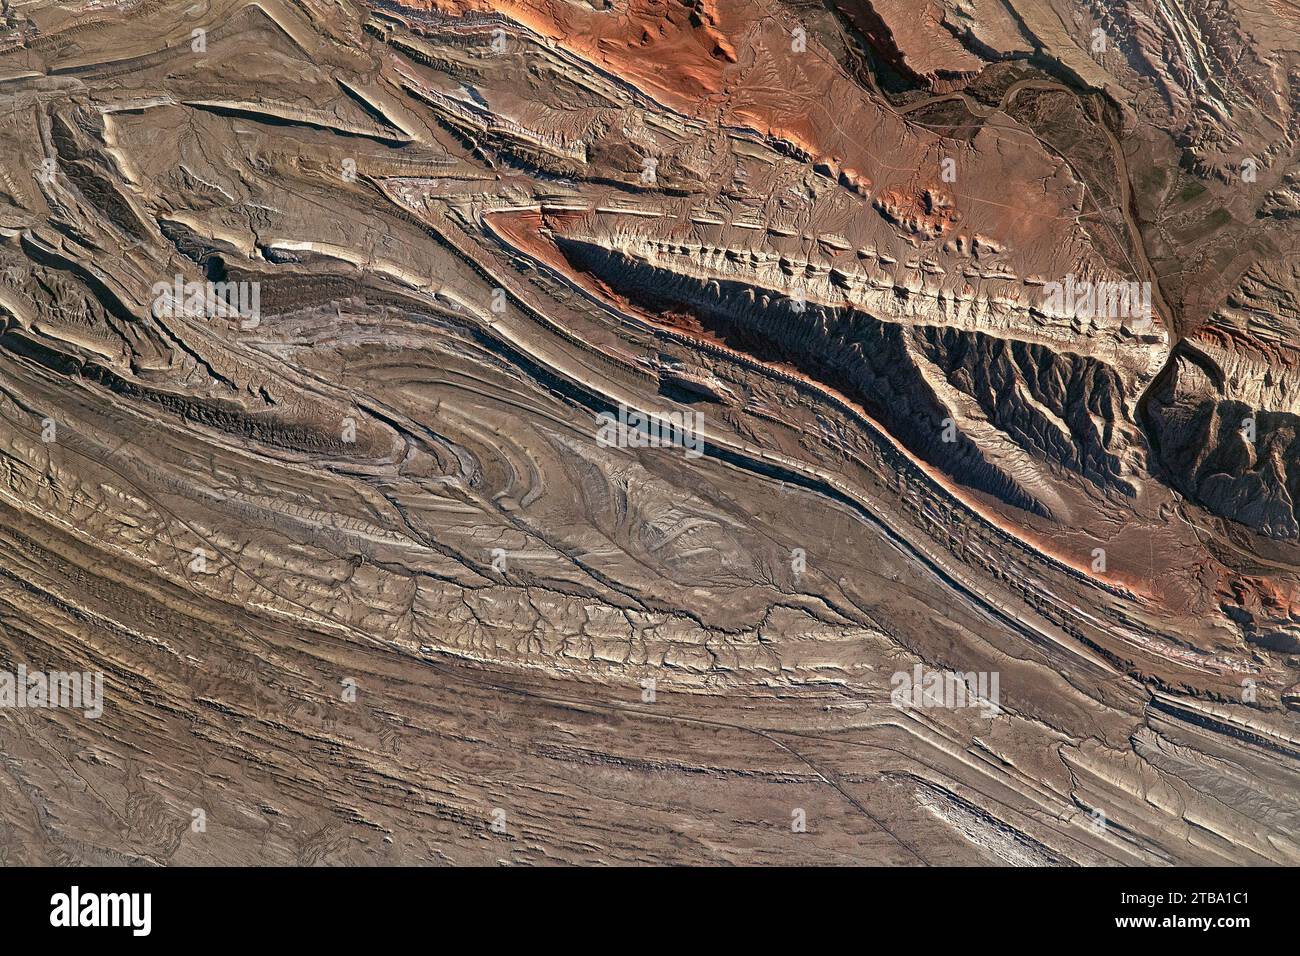 View from space showing the folds and geological structures of the northern Bighorn Basin. Stock Photo